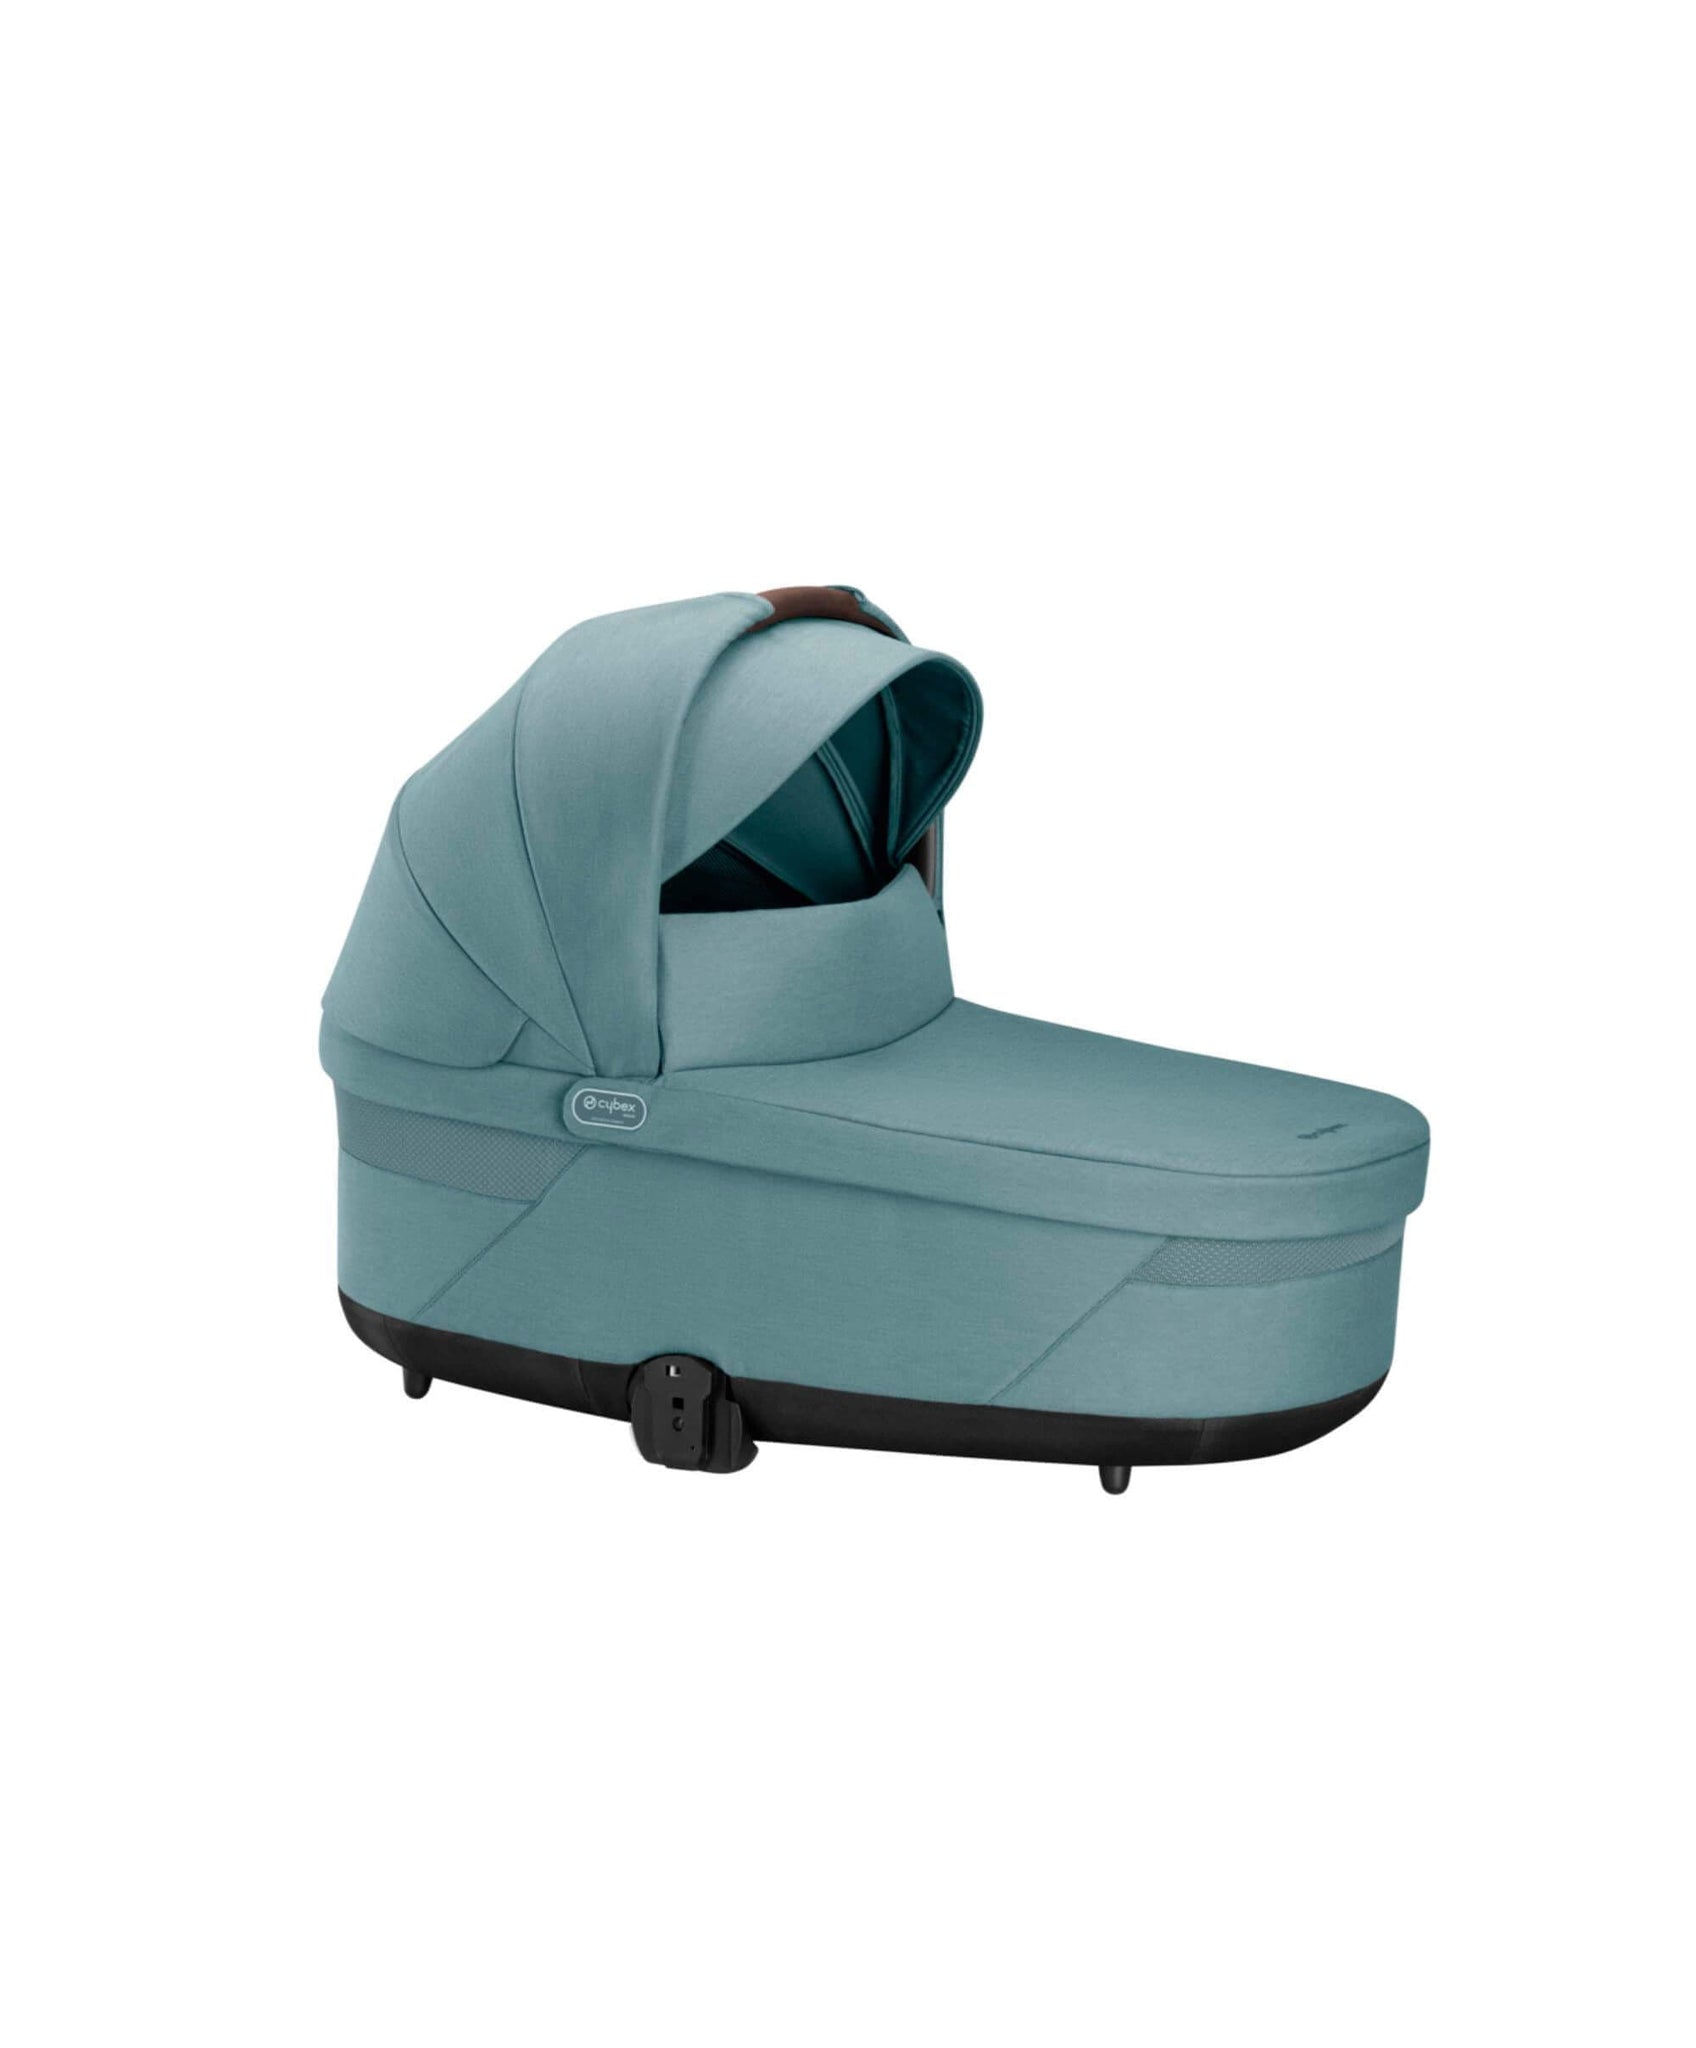 Cybex Balios S Lux Black Chassis with Carrycot - River Blue